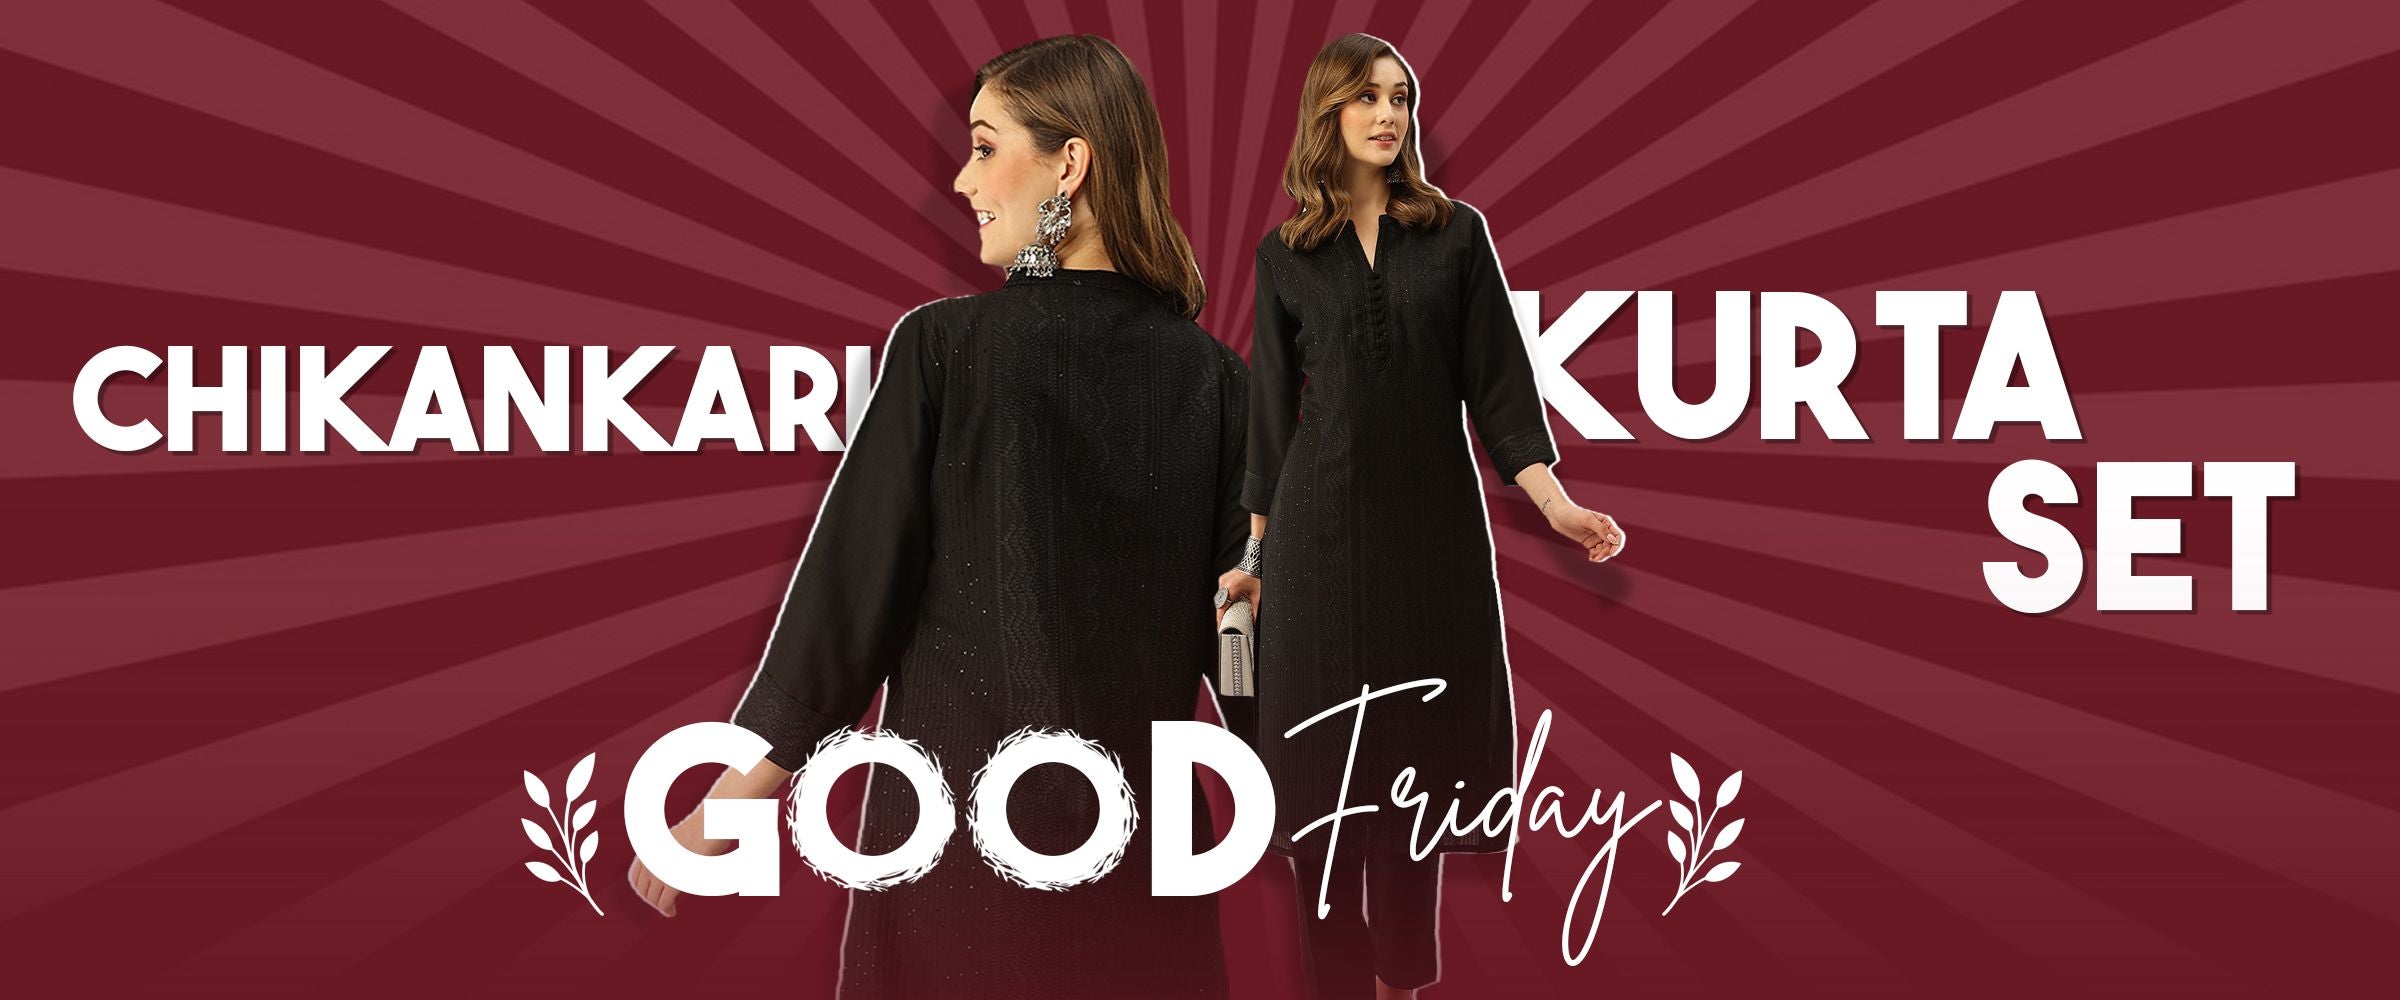 Good Friday Grace: Outfit Ideas for Reflective and Solemn Days